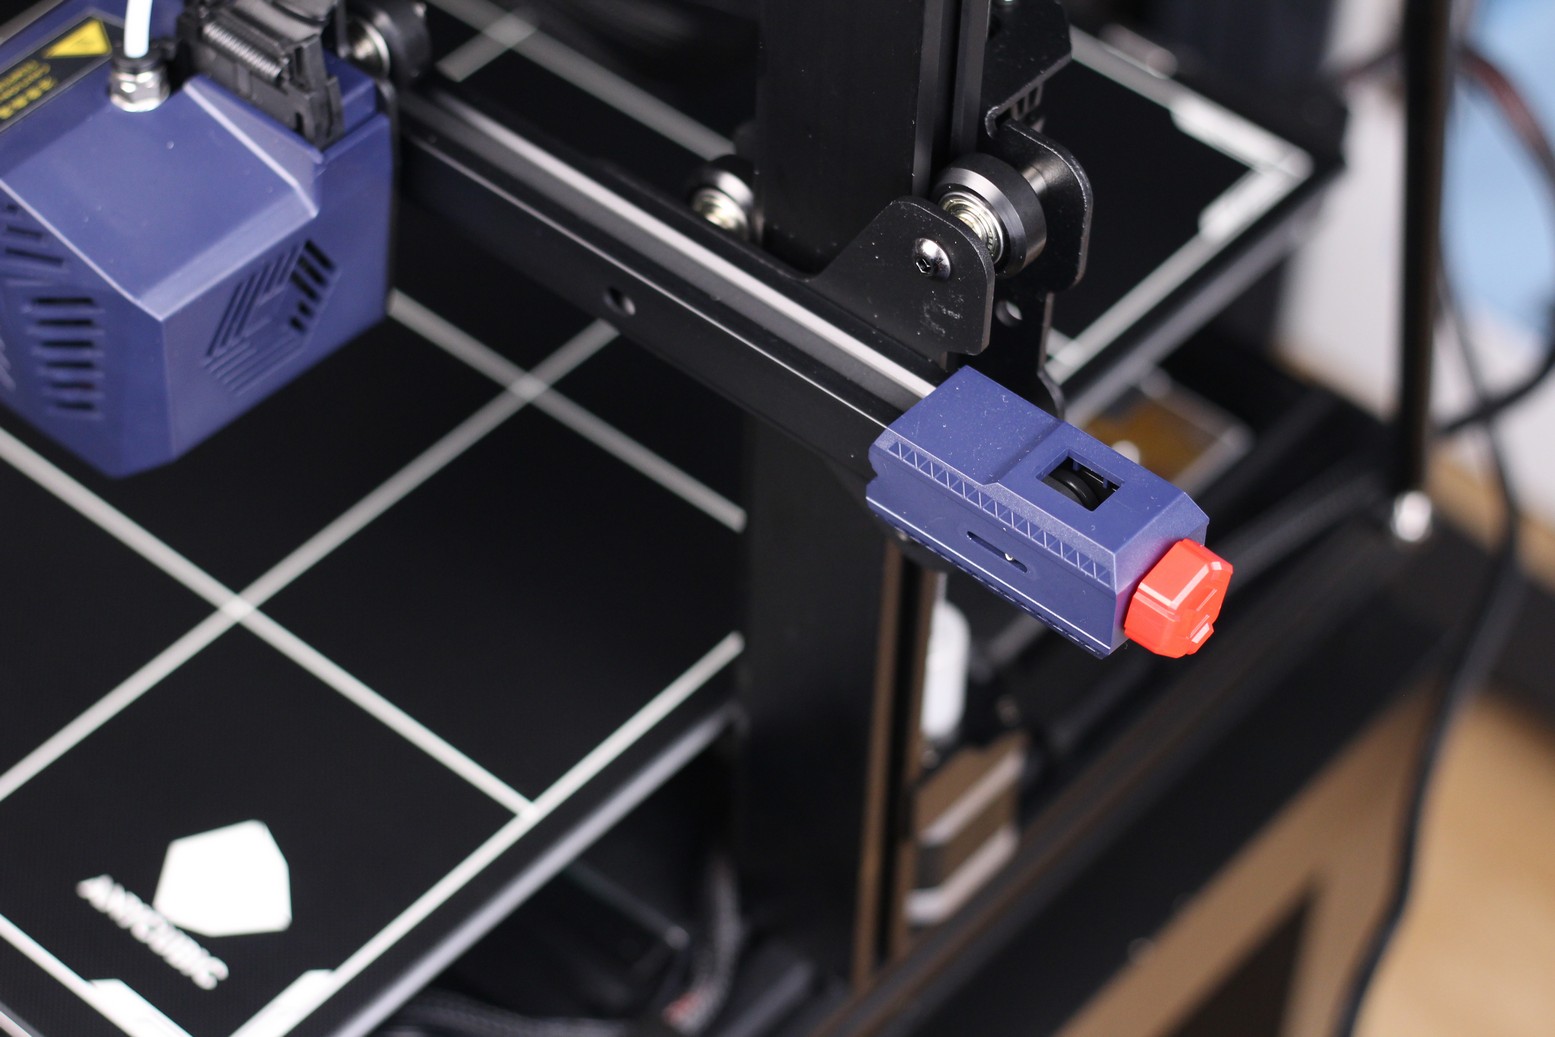 Anycubic Kobra Max Belt adjustment knobs 2 | Anycubic Kobra Max Review: Big Printer For People with Big Dreams